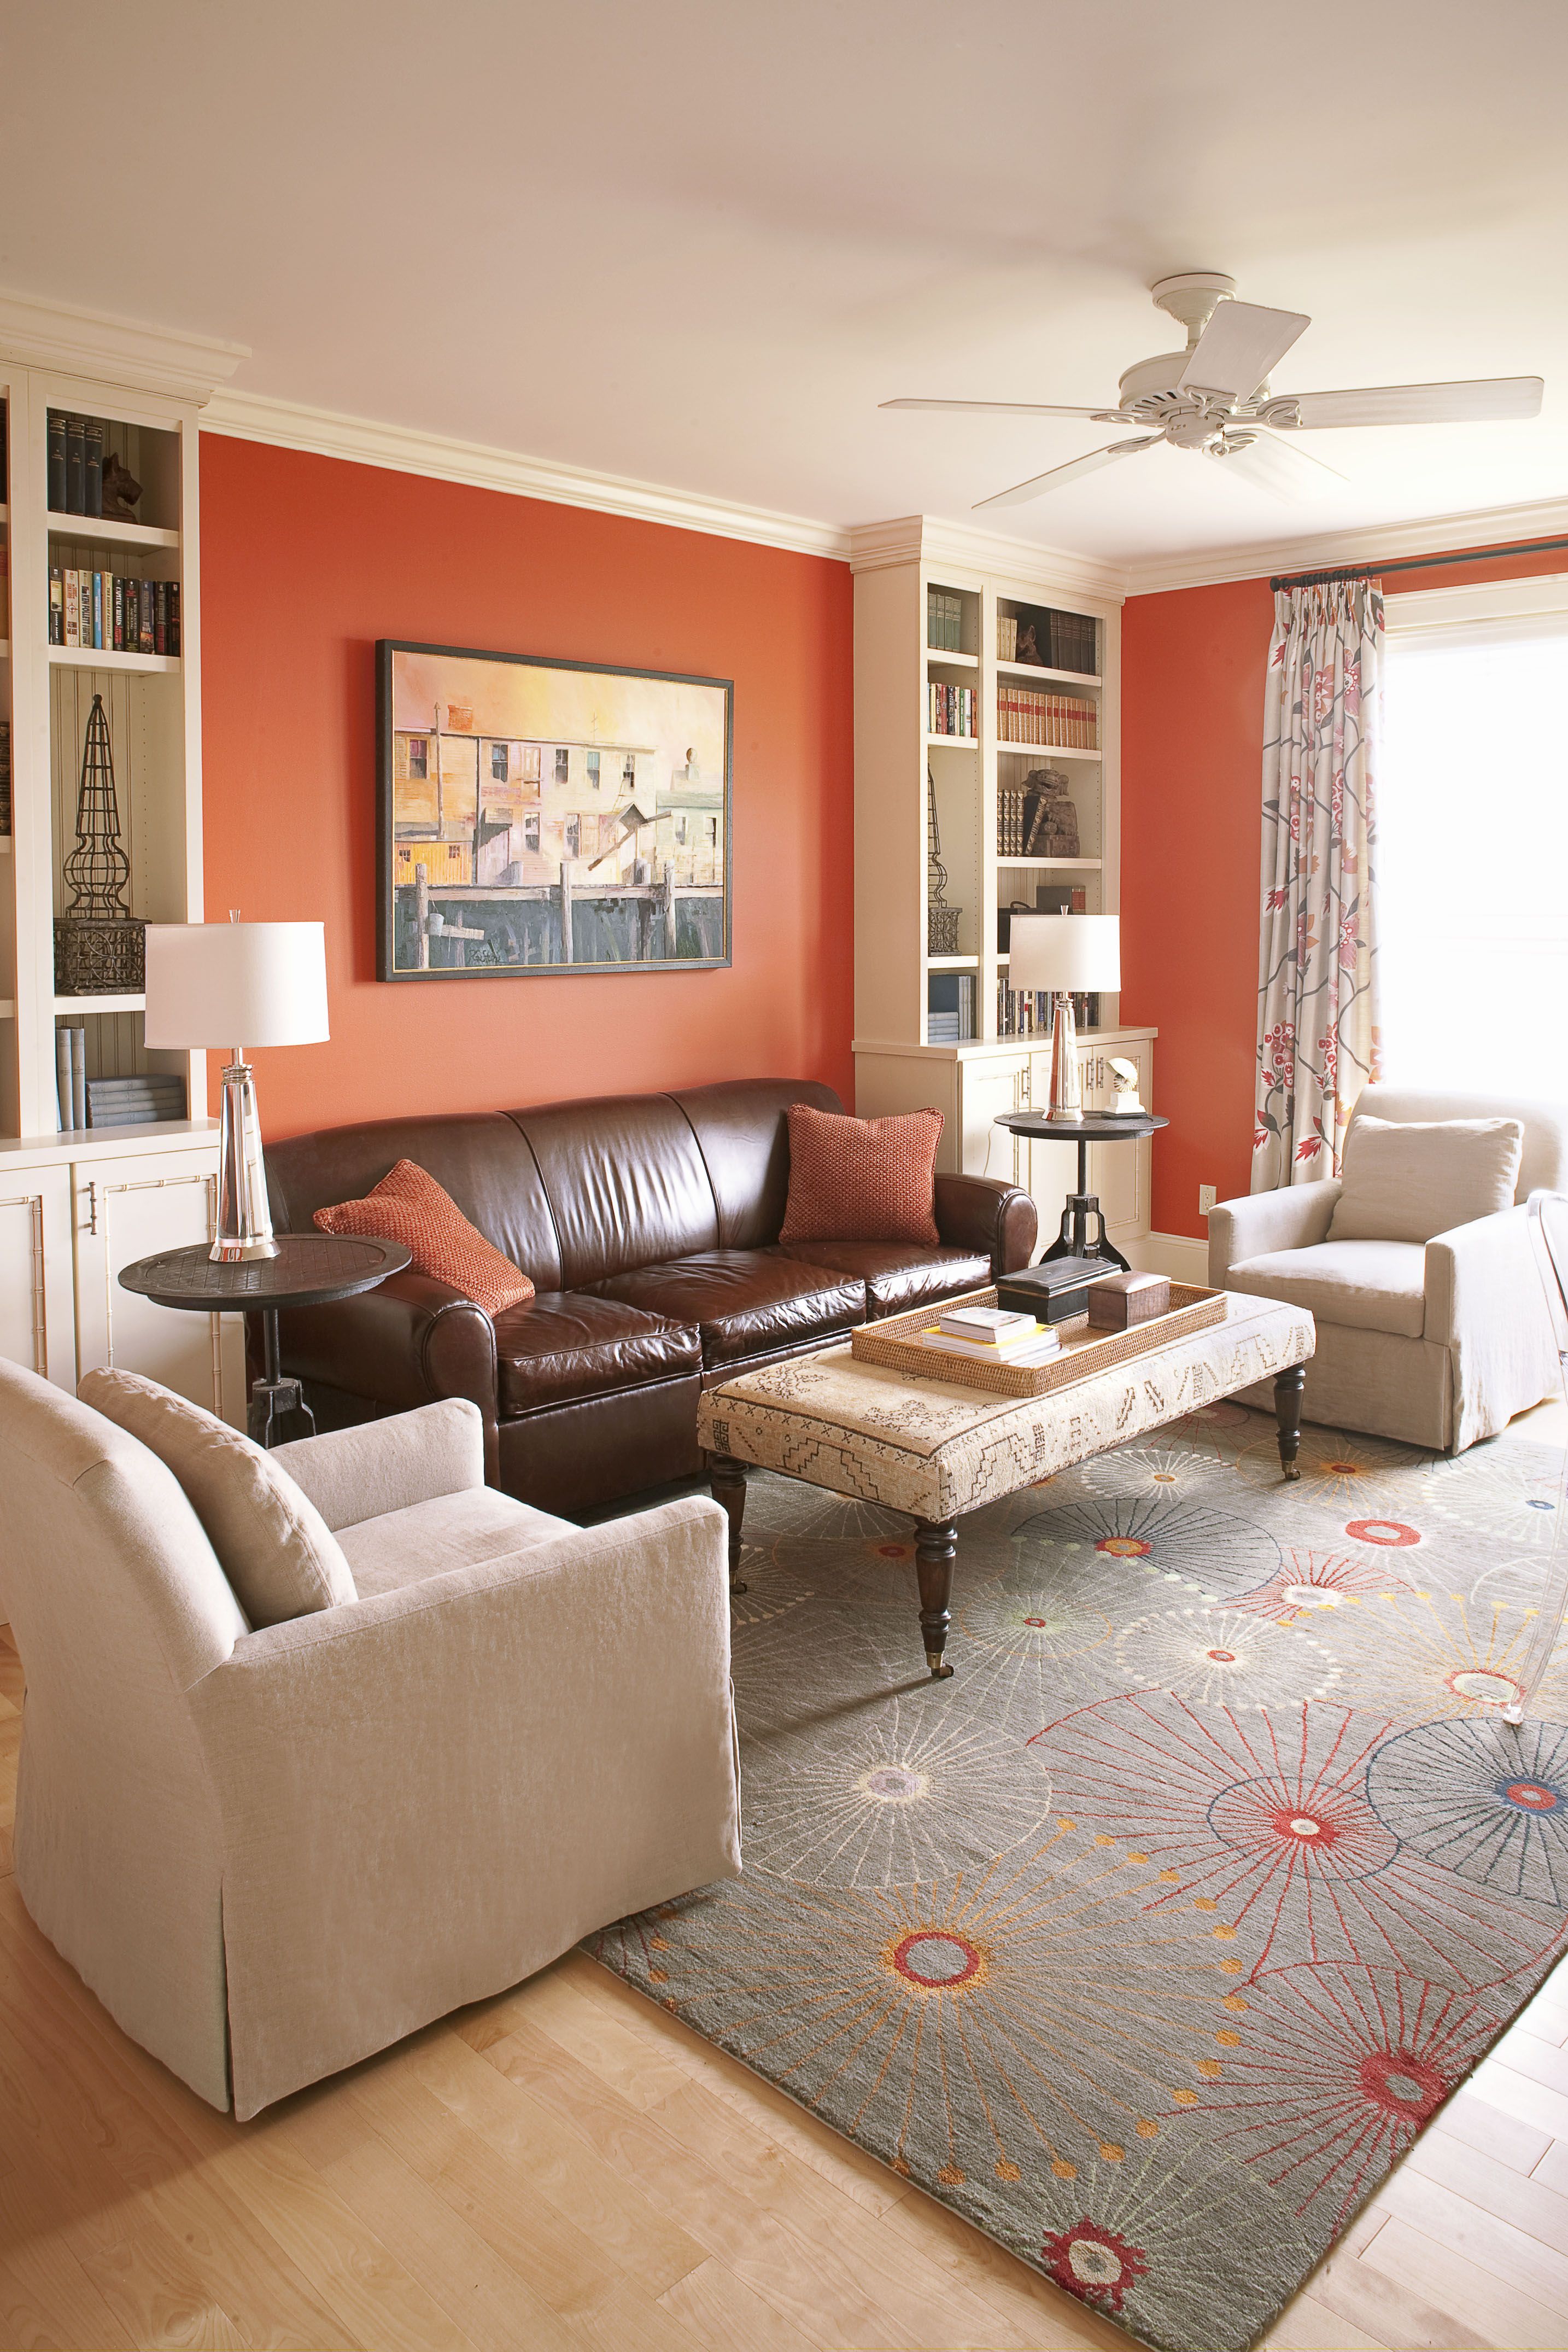 Paint Colors For Living Room Images